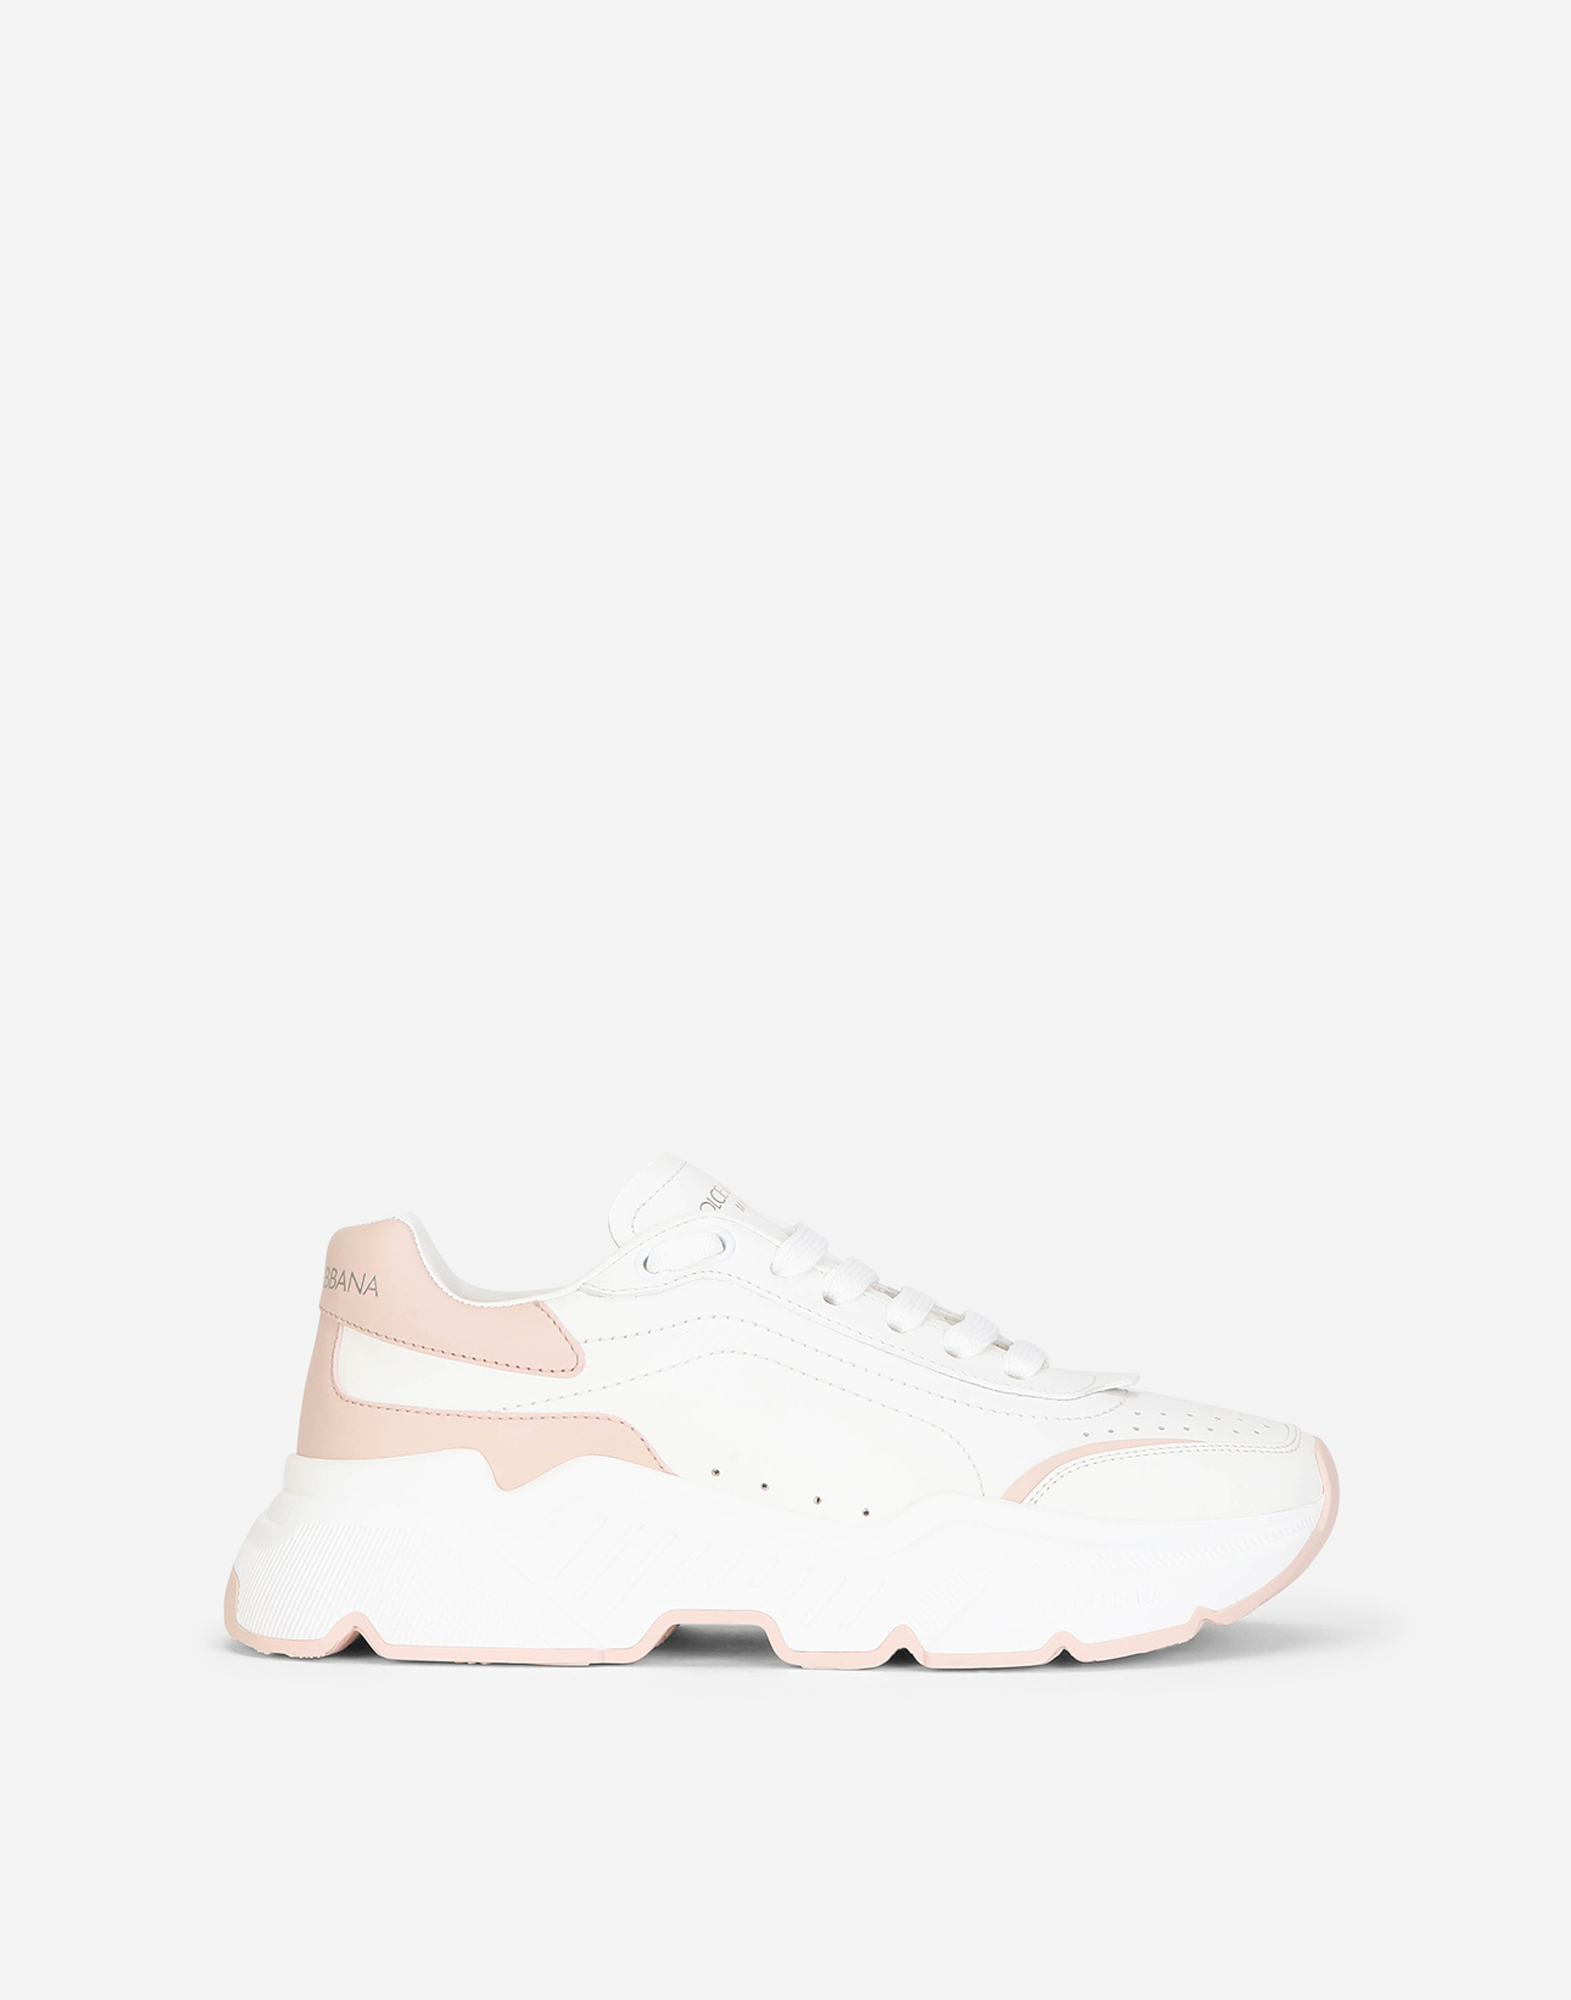 Nappa leather Daymaster sneakers in White/Pink